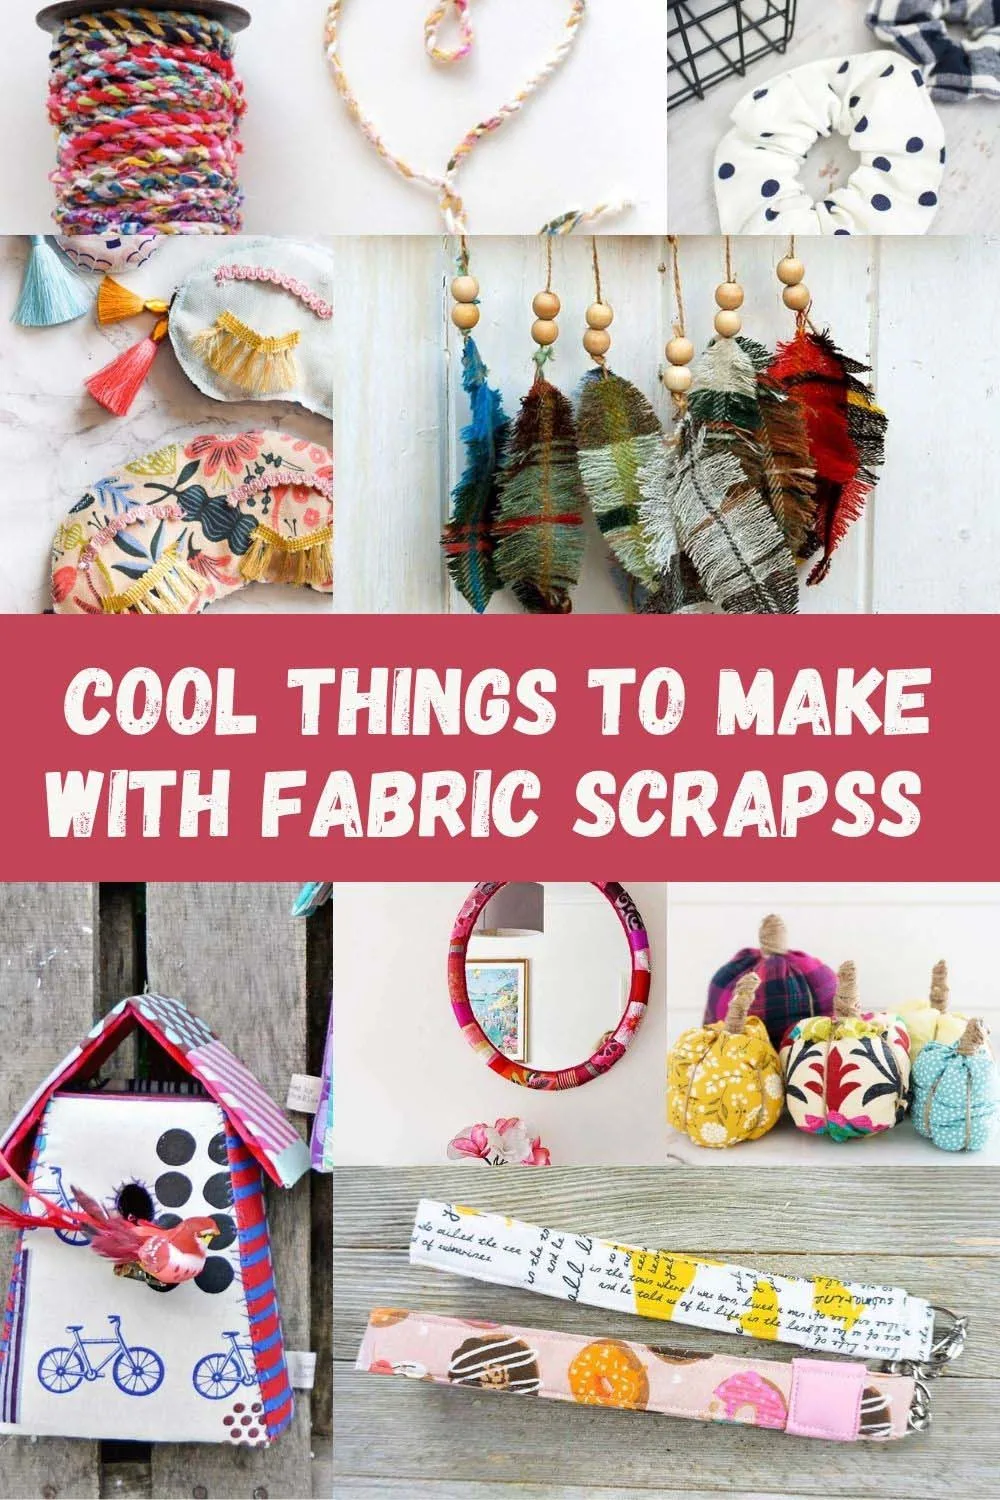 Share more than 74 fabric scrap bags best - in.cdgdbentre